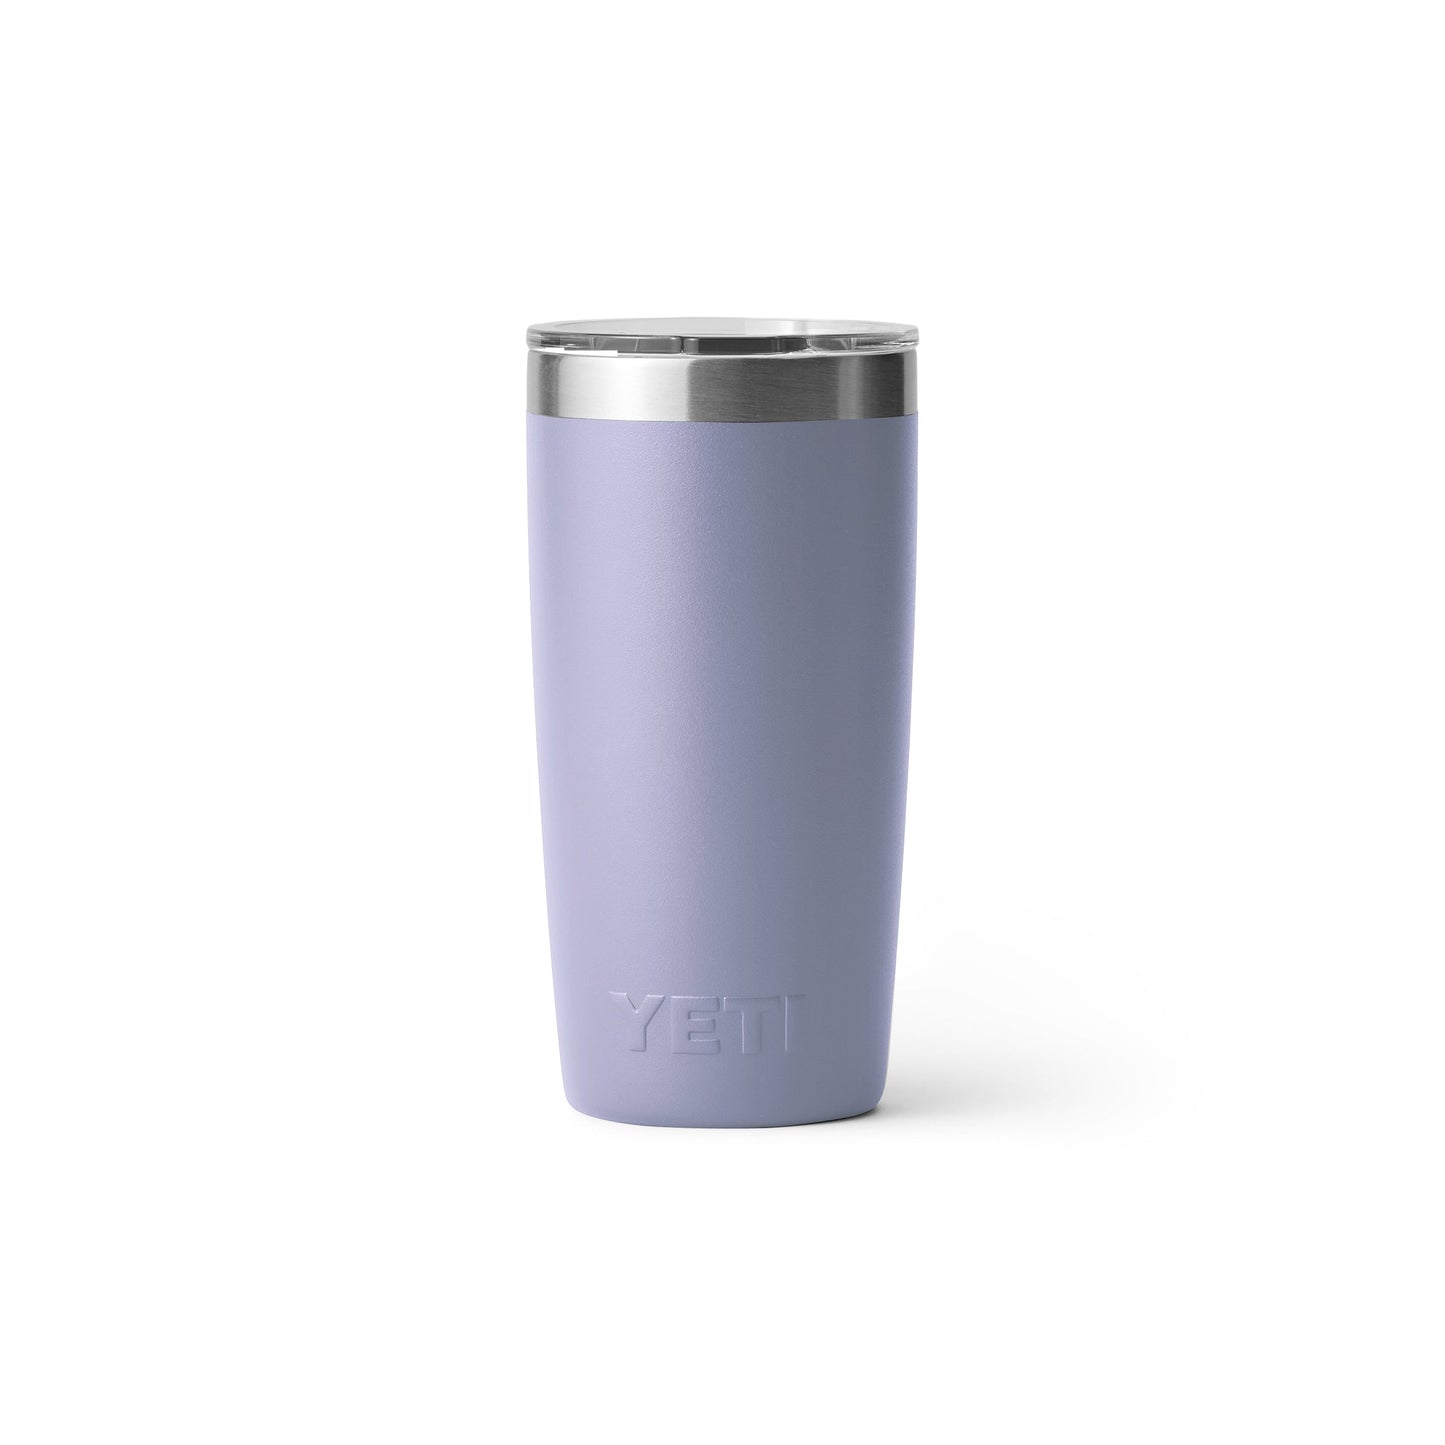 Yeti Tumbler 10oz (295ml) with Magslider Lid-Coolers & Drinkware-Yeti-Stainless-Fishing Station